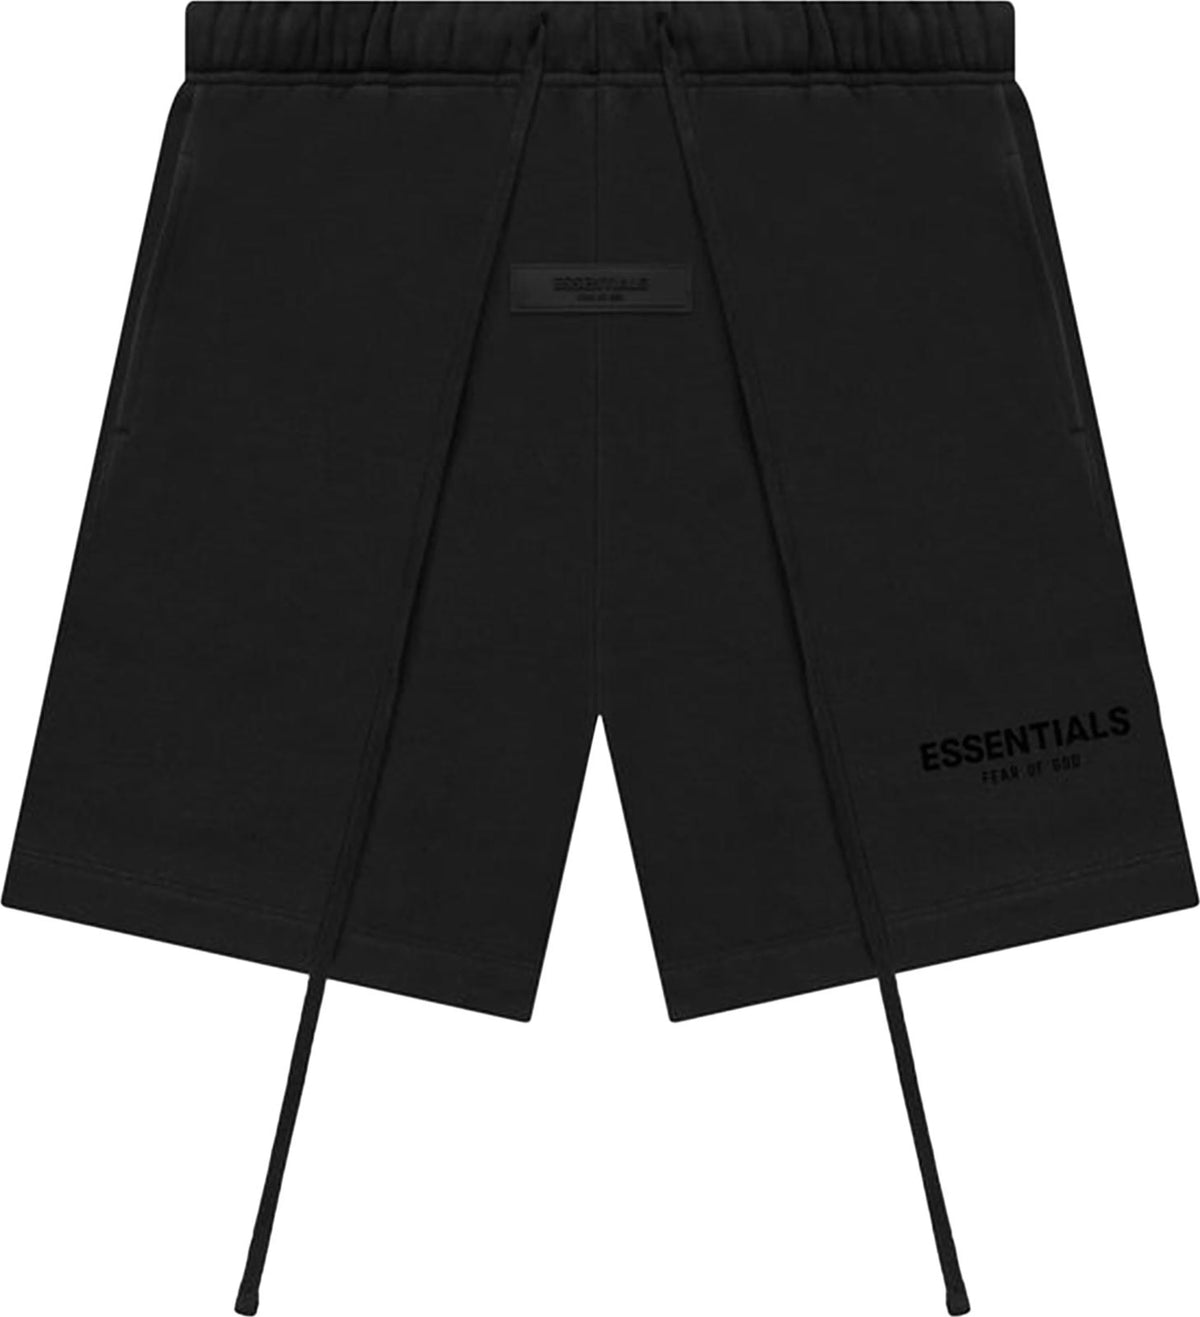 Fear of God Essentials Cotton Short 'Stretch Limo'